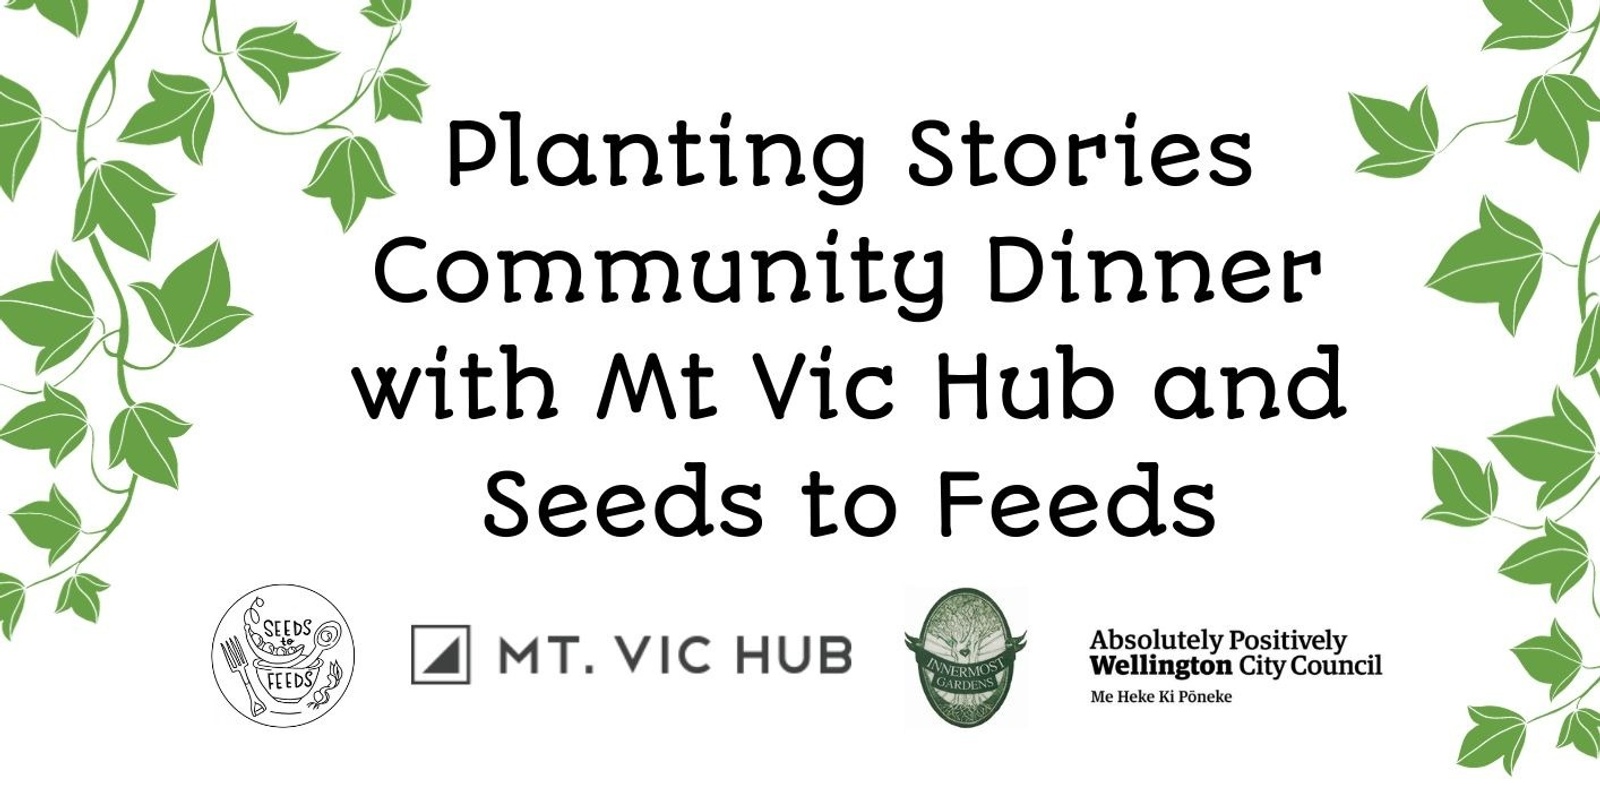 Banner image for Planting Stories - Community dinner with Mt Vic Hub and Seeds to Feeds